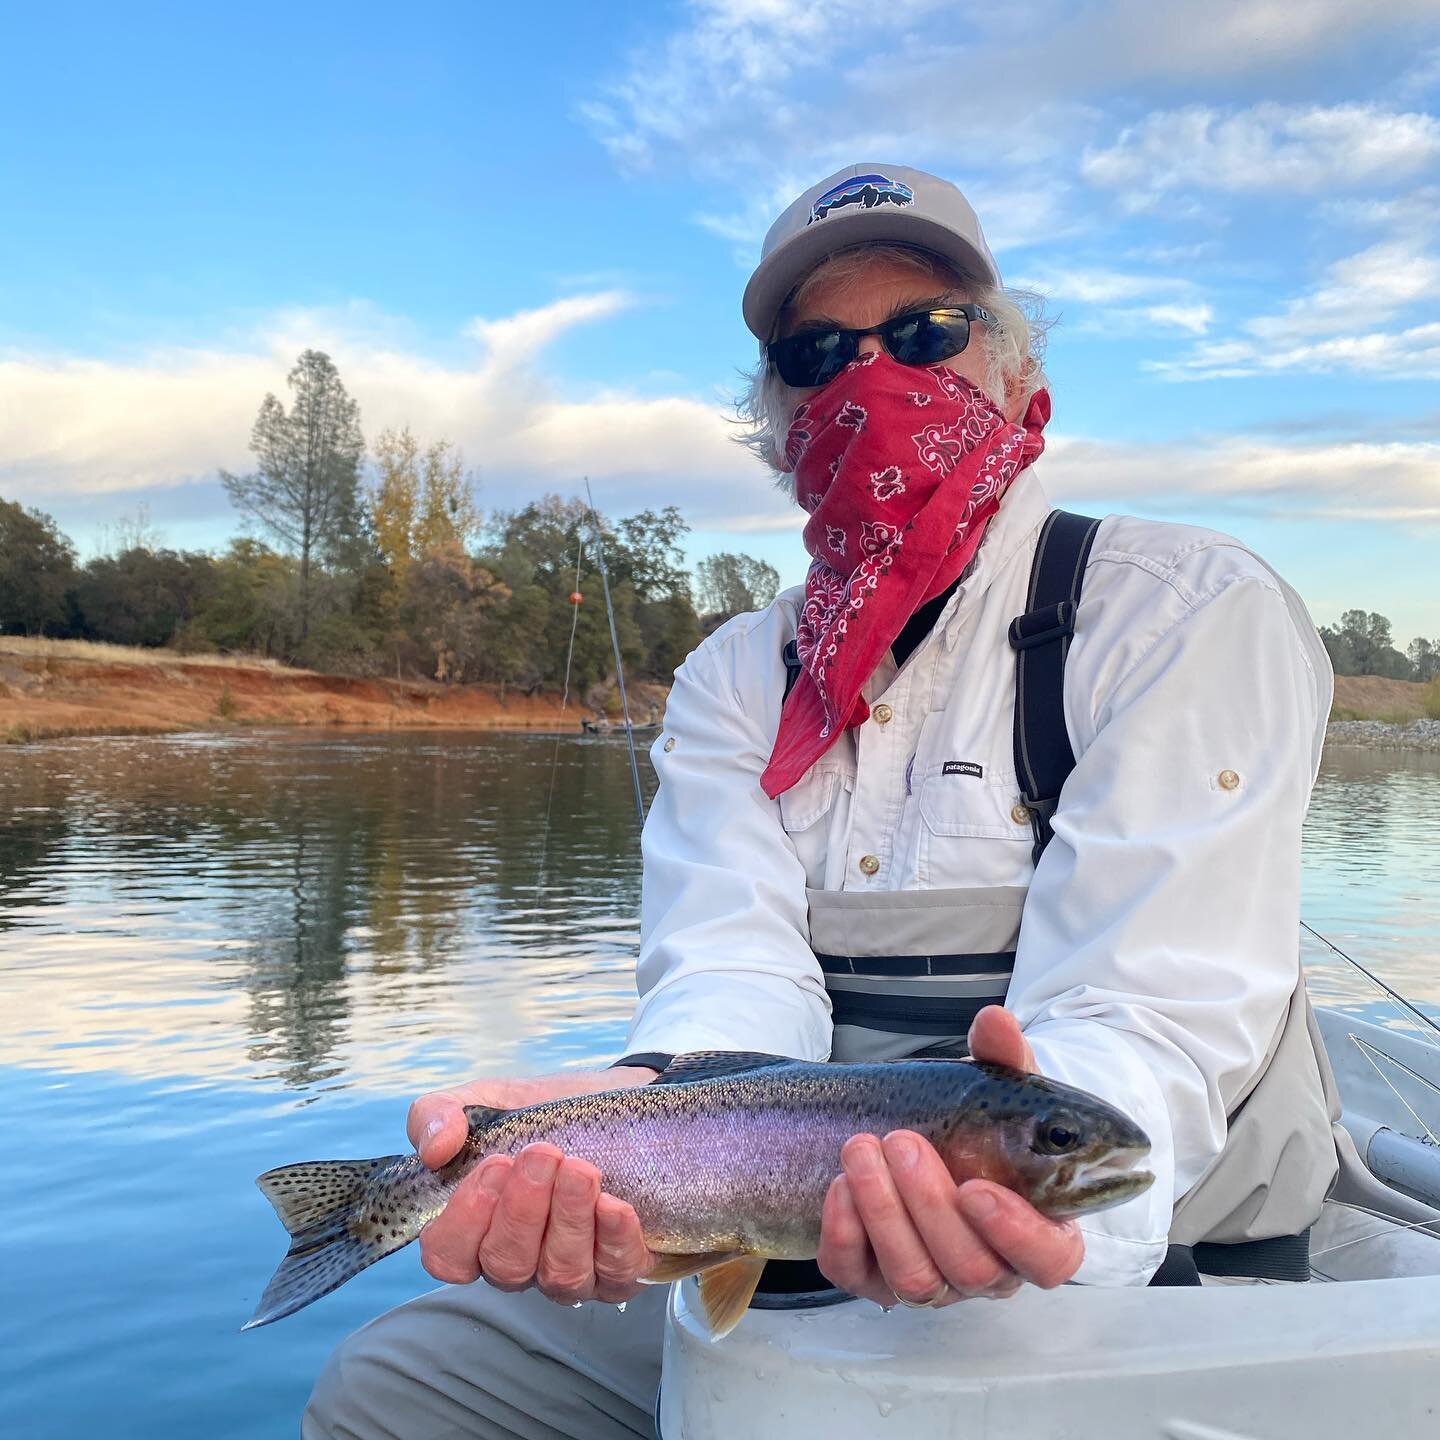 Happy Thanksgiving! The Lower Yuba has been kicking out some nice fish over the last few weeks!!
&lsquo;
#flyfishing #fishca #california #trout #hydedriftboats #getoutside #yubariver